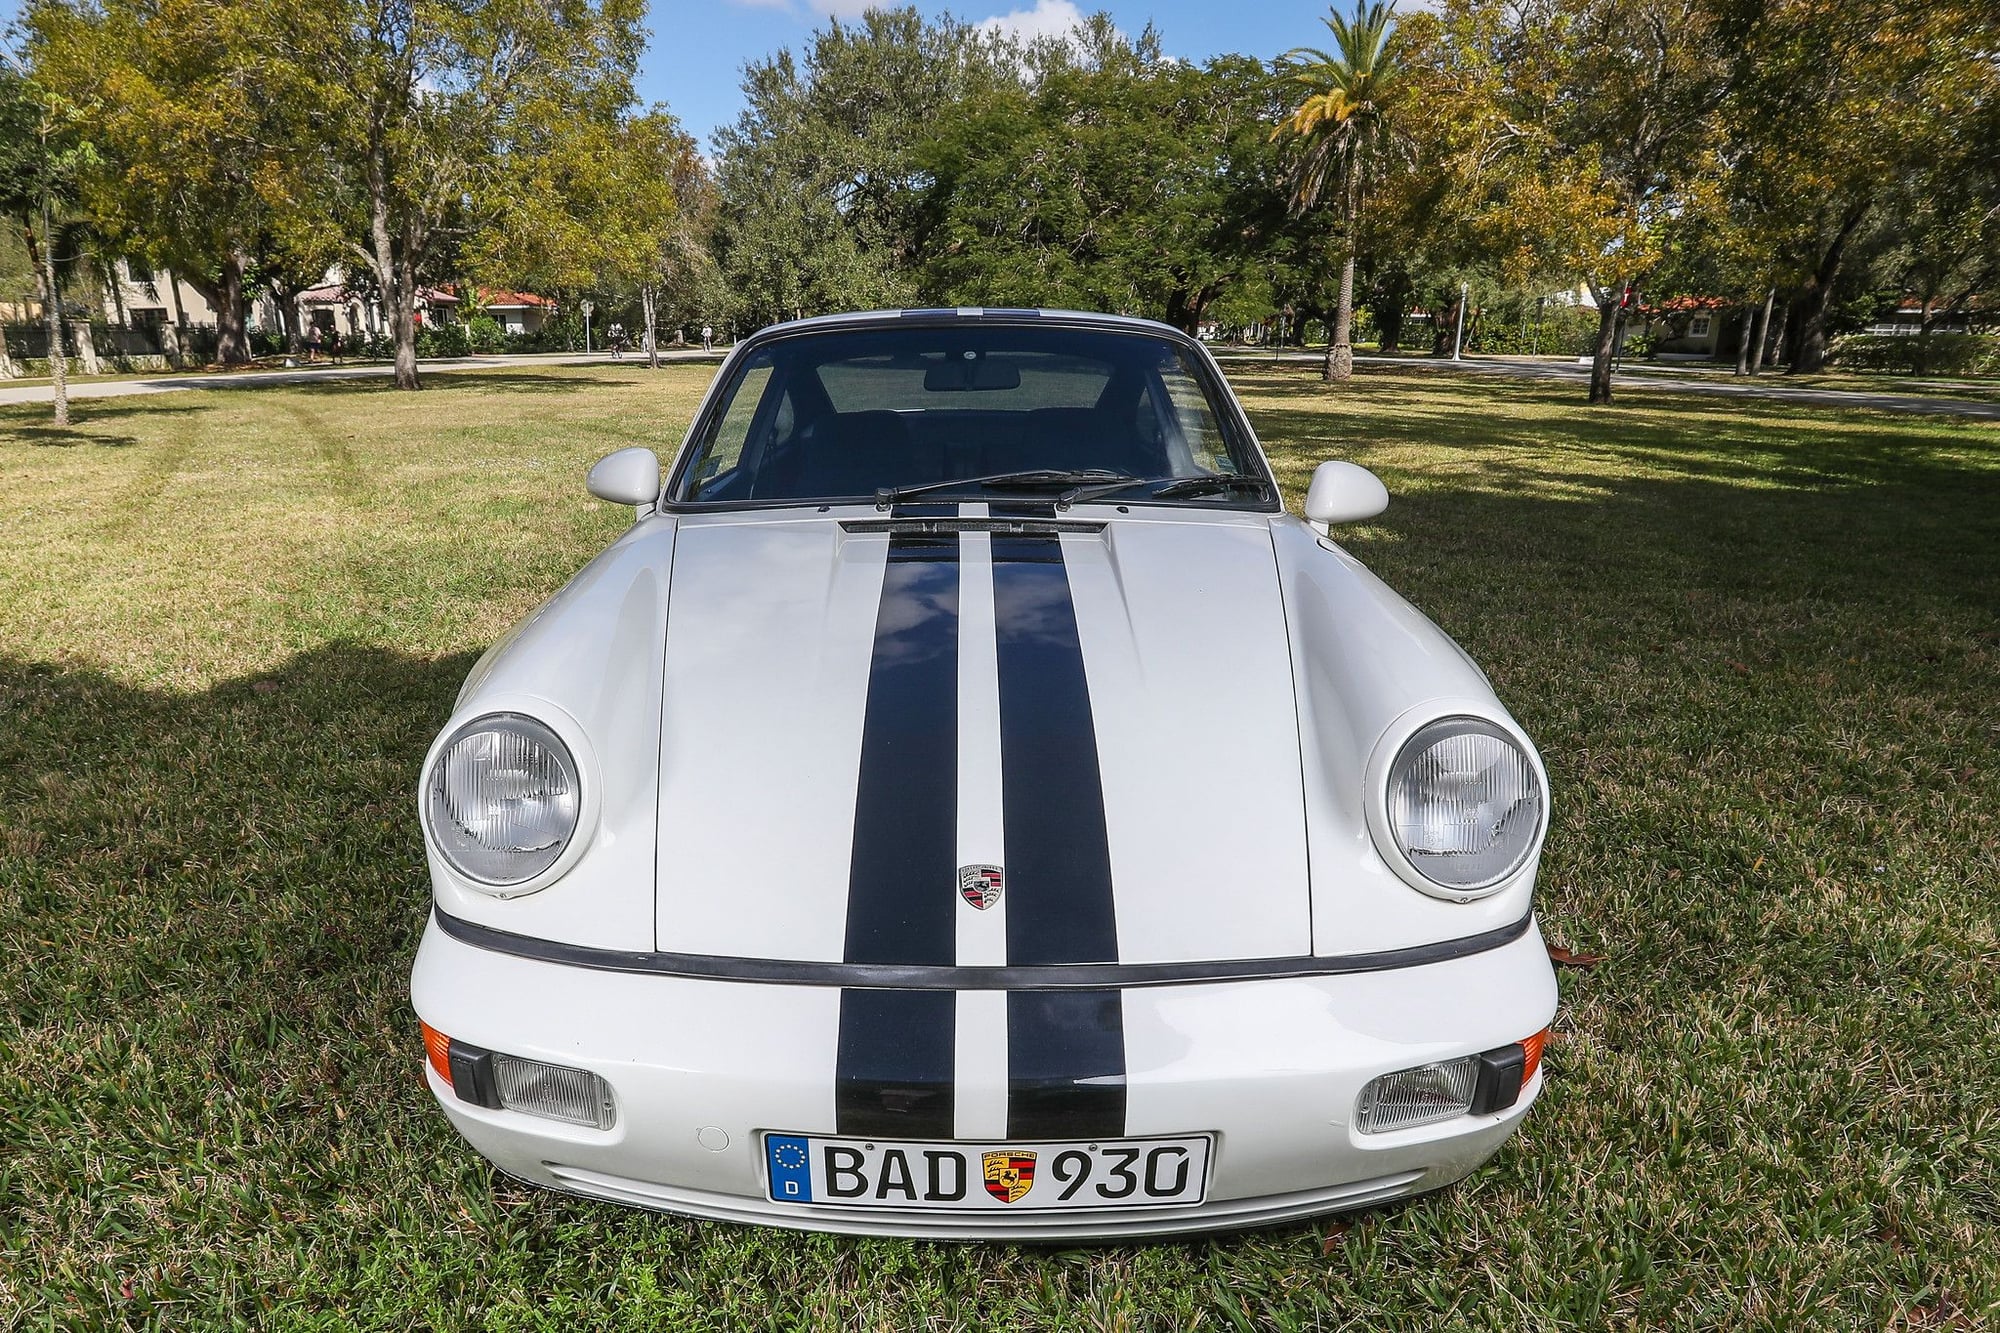 1987 Porsche 911 - 1987 930 Turbo Porsche Excellent Conditions - Used - VIN WP0JB093XHS050688 - 70 Miles - 6 cyl - 2WD - Manual - Coupe - White - Miami, FL 33126, United States